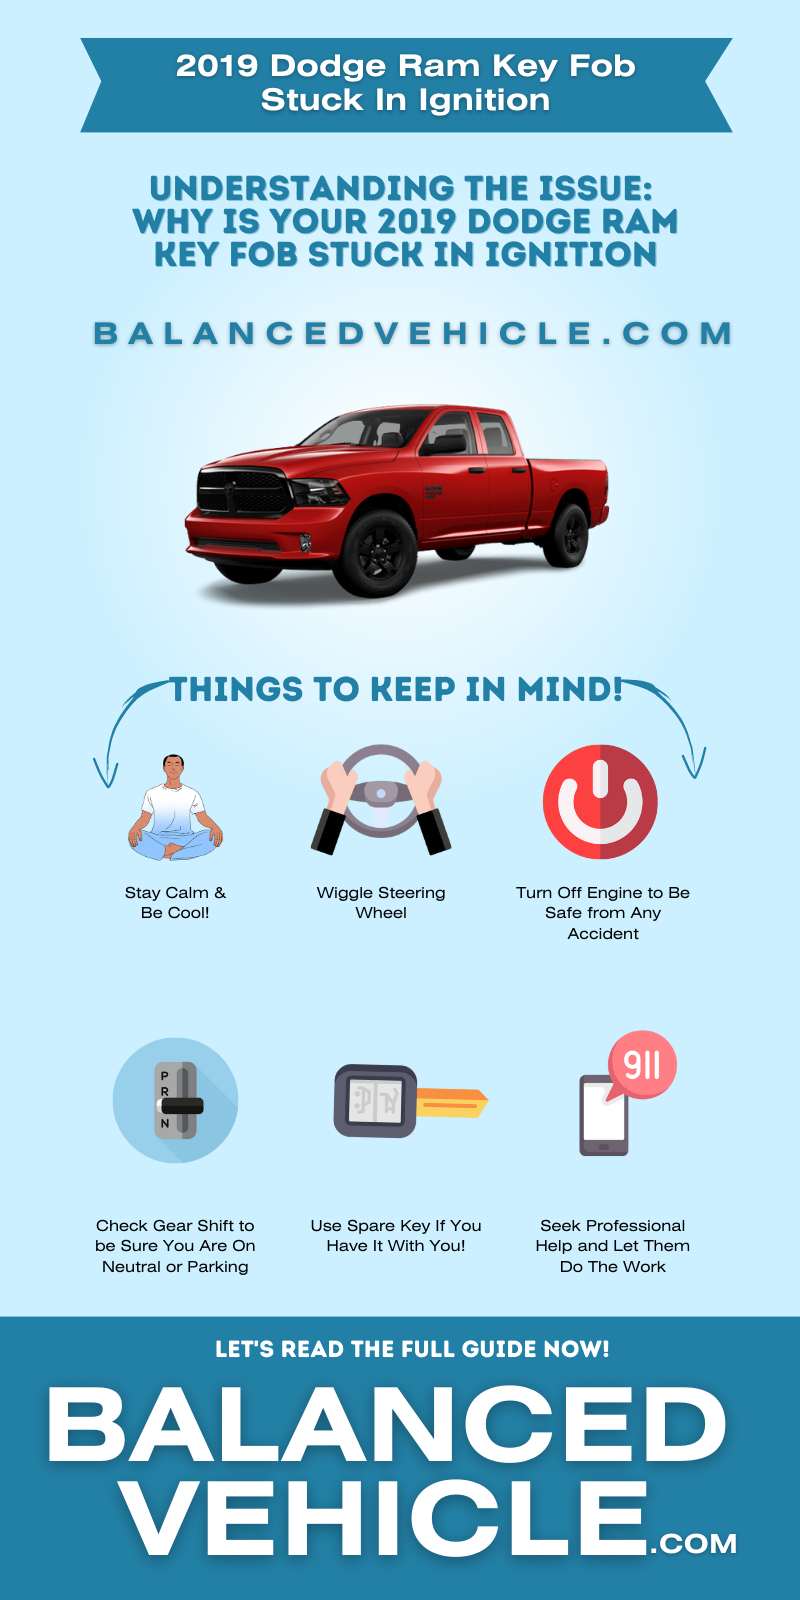 2019 Dodge Ram Key Fob Stuck In Ignition - Infographic 